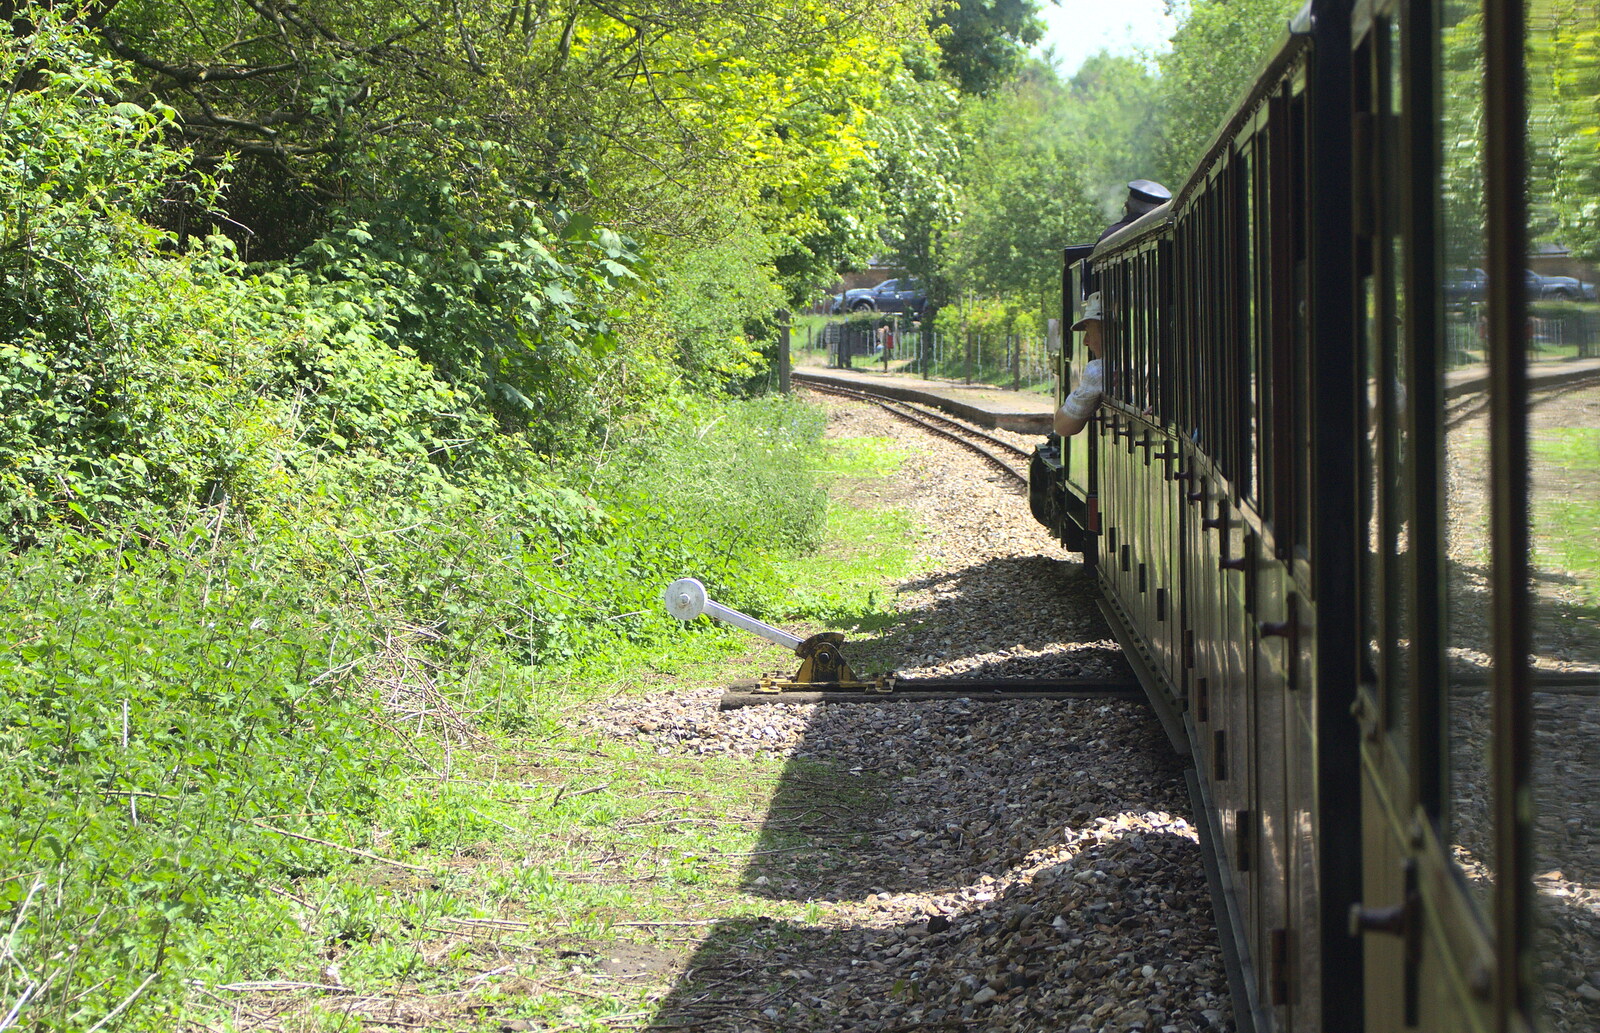 A view along the tracks from The Bure Valley Railway, Aylsham, Norfolk - 26th May 2013